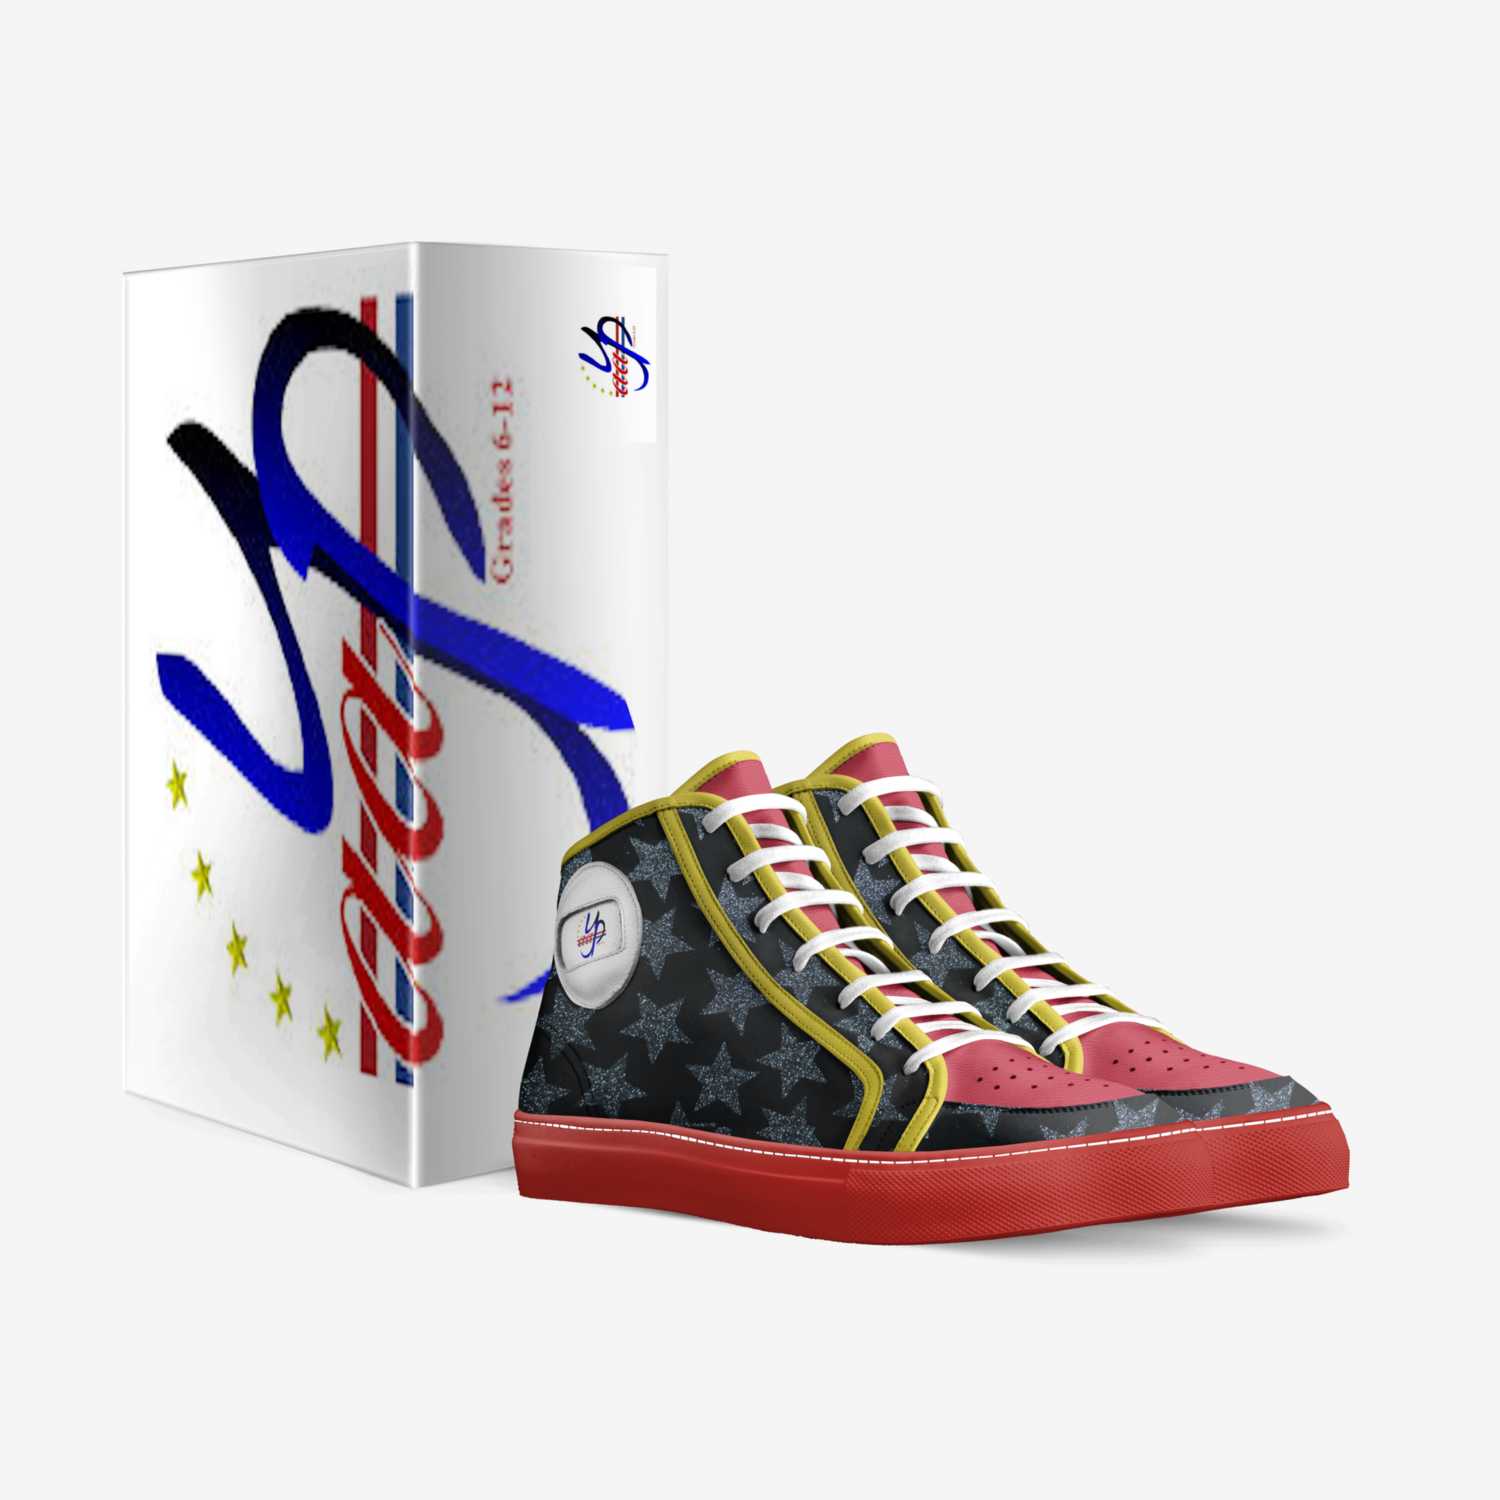 AA-YP Exclusive  custom made in Italy shoes by The American Academy for Young Professionals, Inc. | Box view